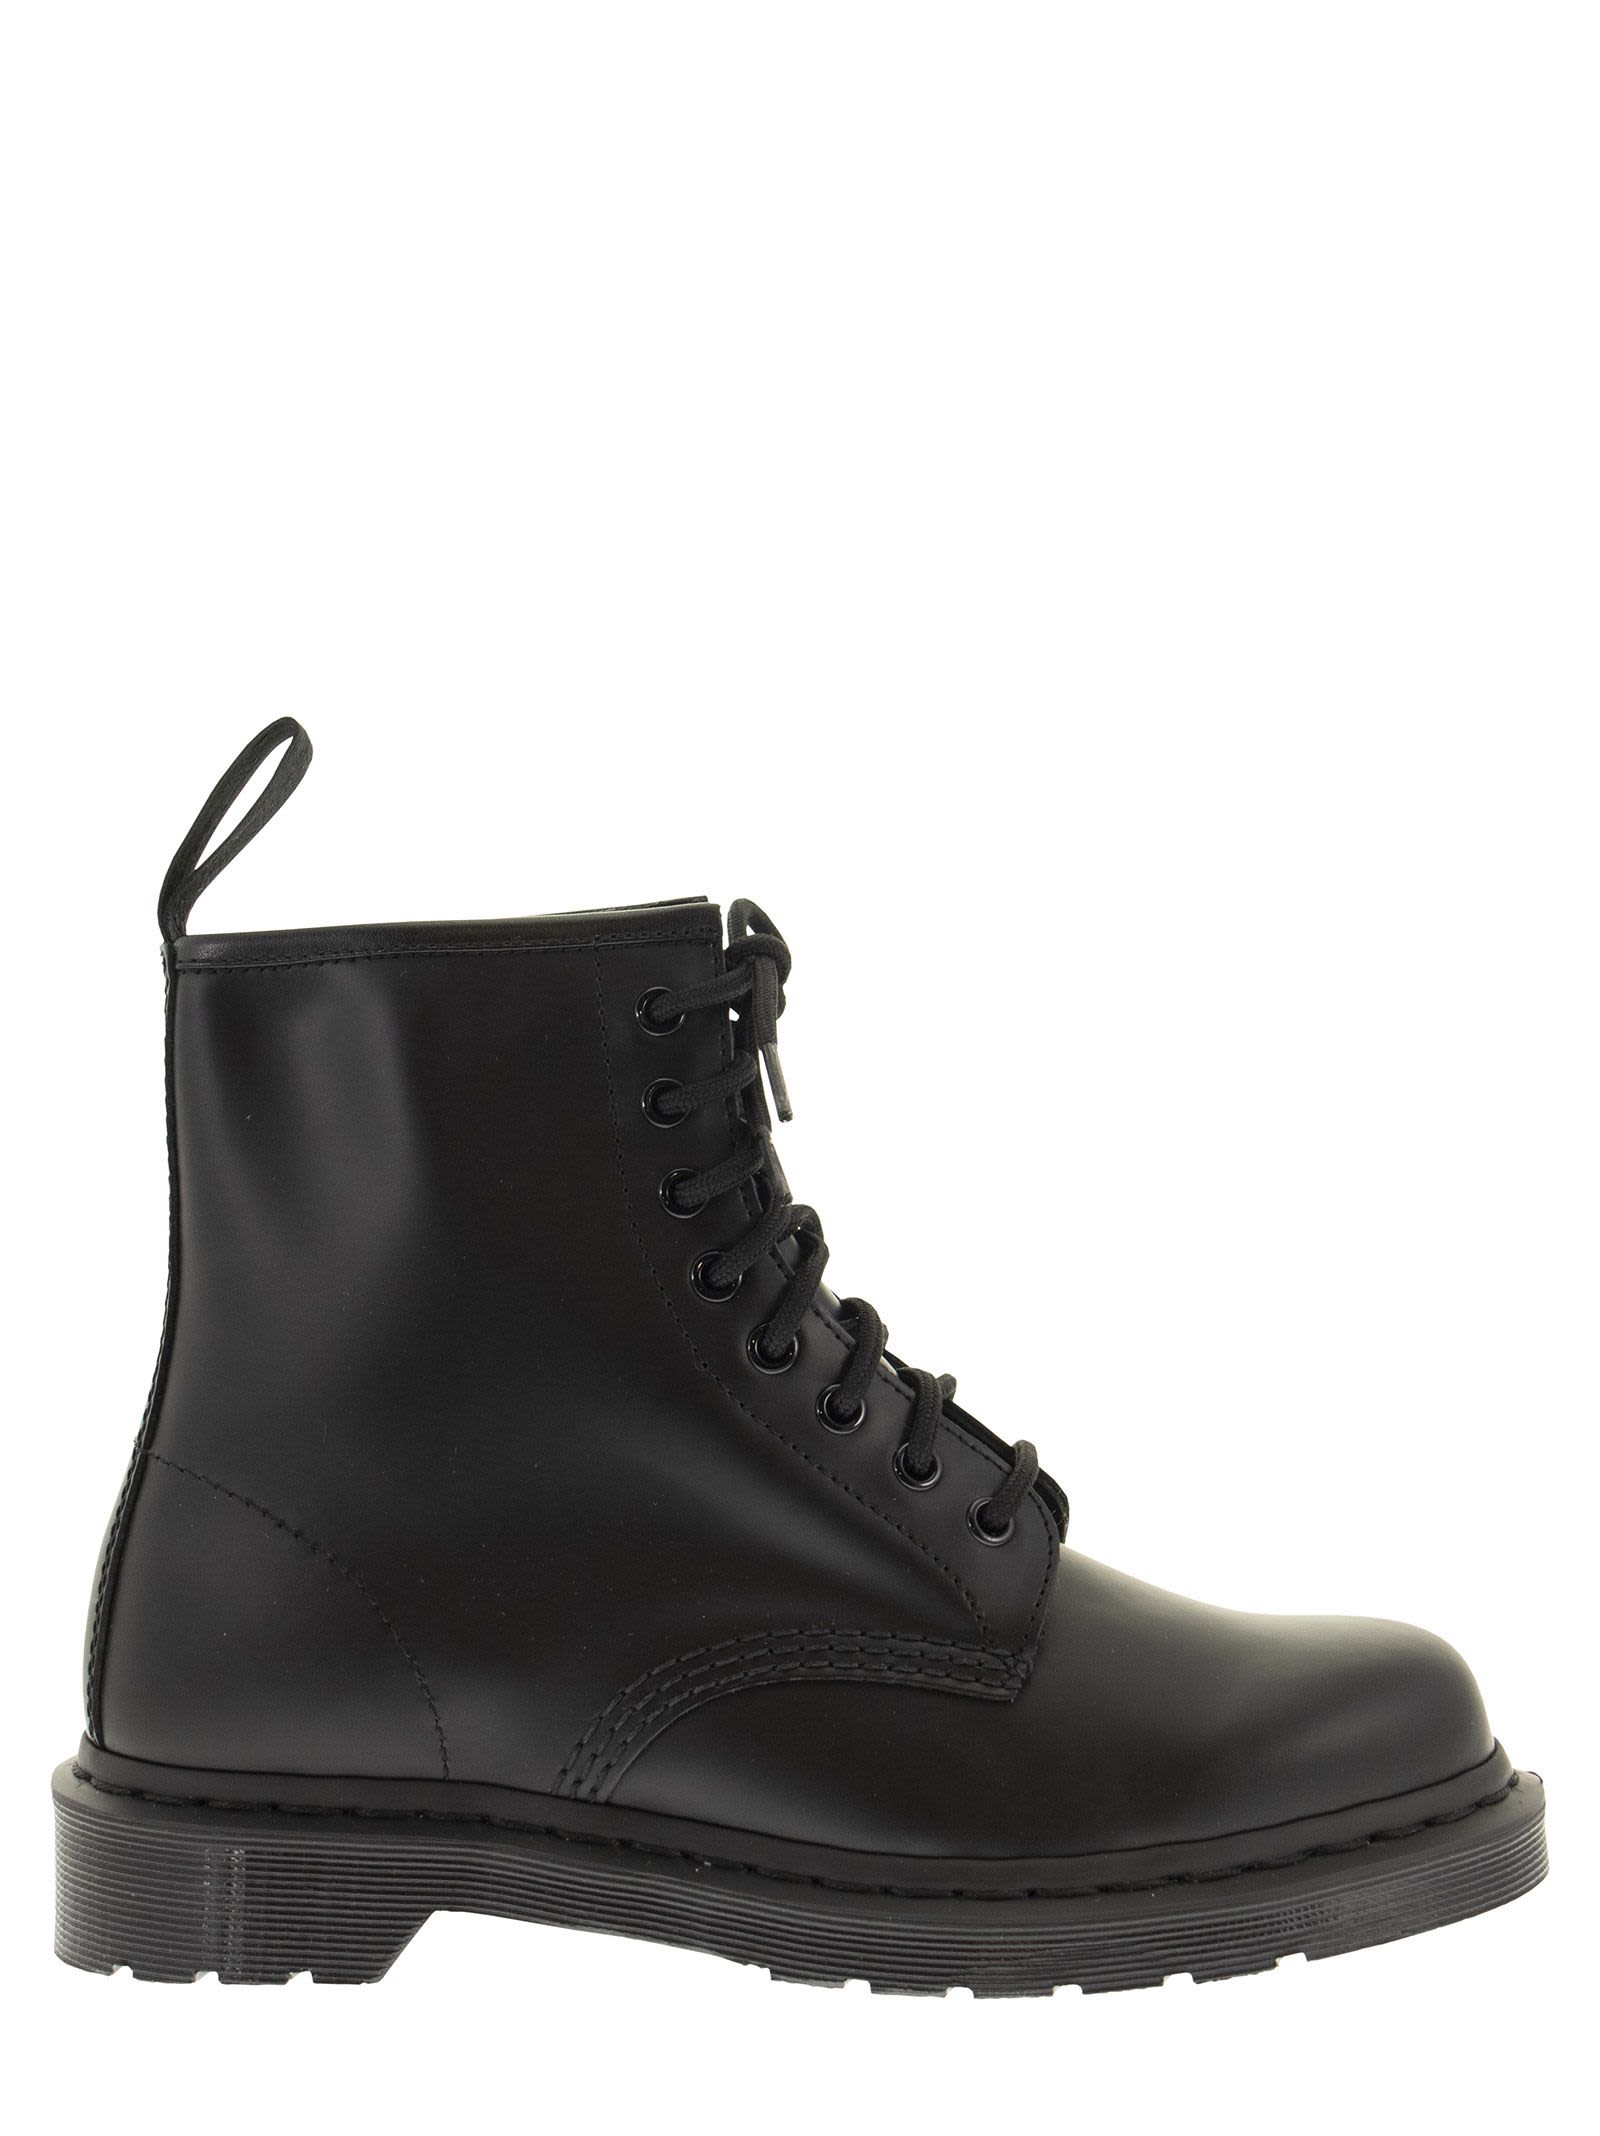 Dr. Martens 1460 Mono - Leather Ankle Boot